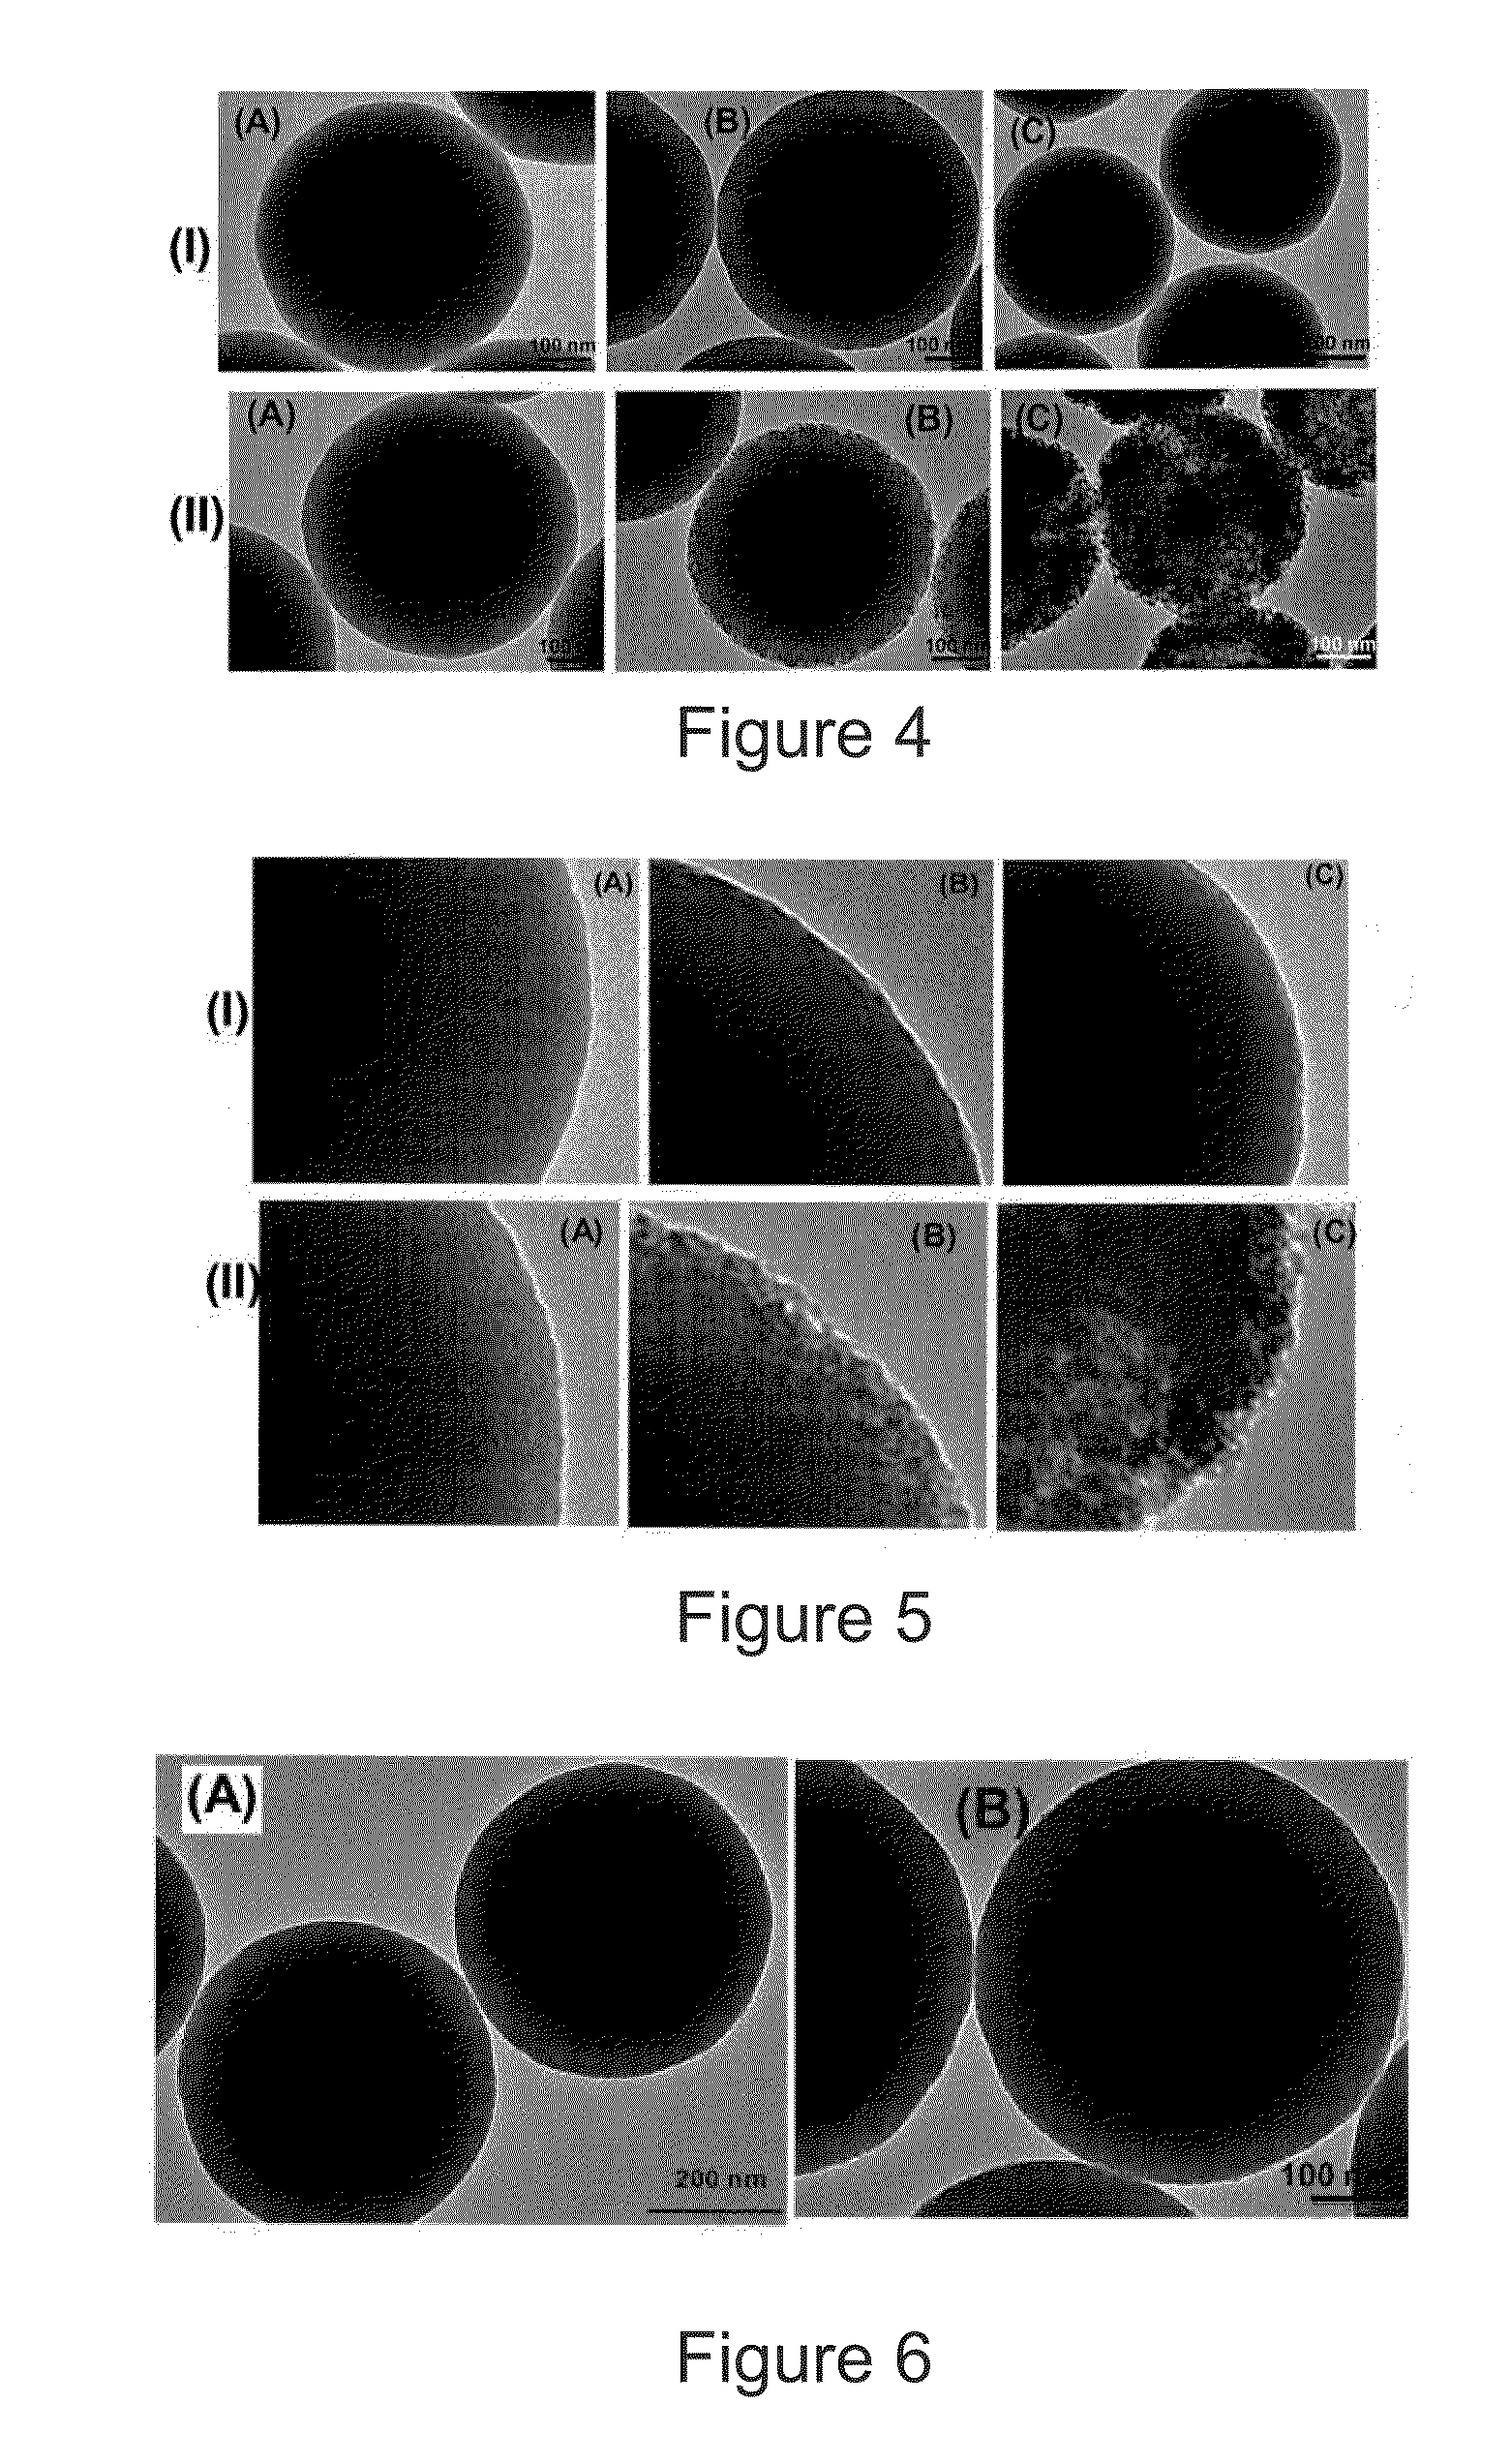 Corrugated and nanoporous microstructures and nanostructures, and methods for synthesizing the same